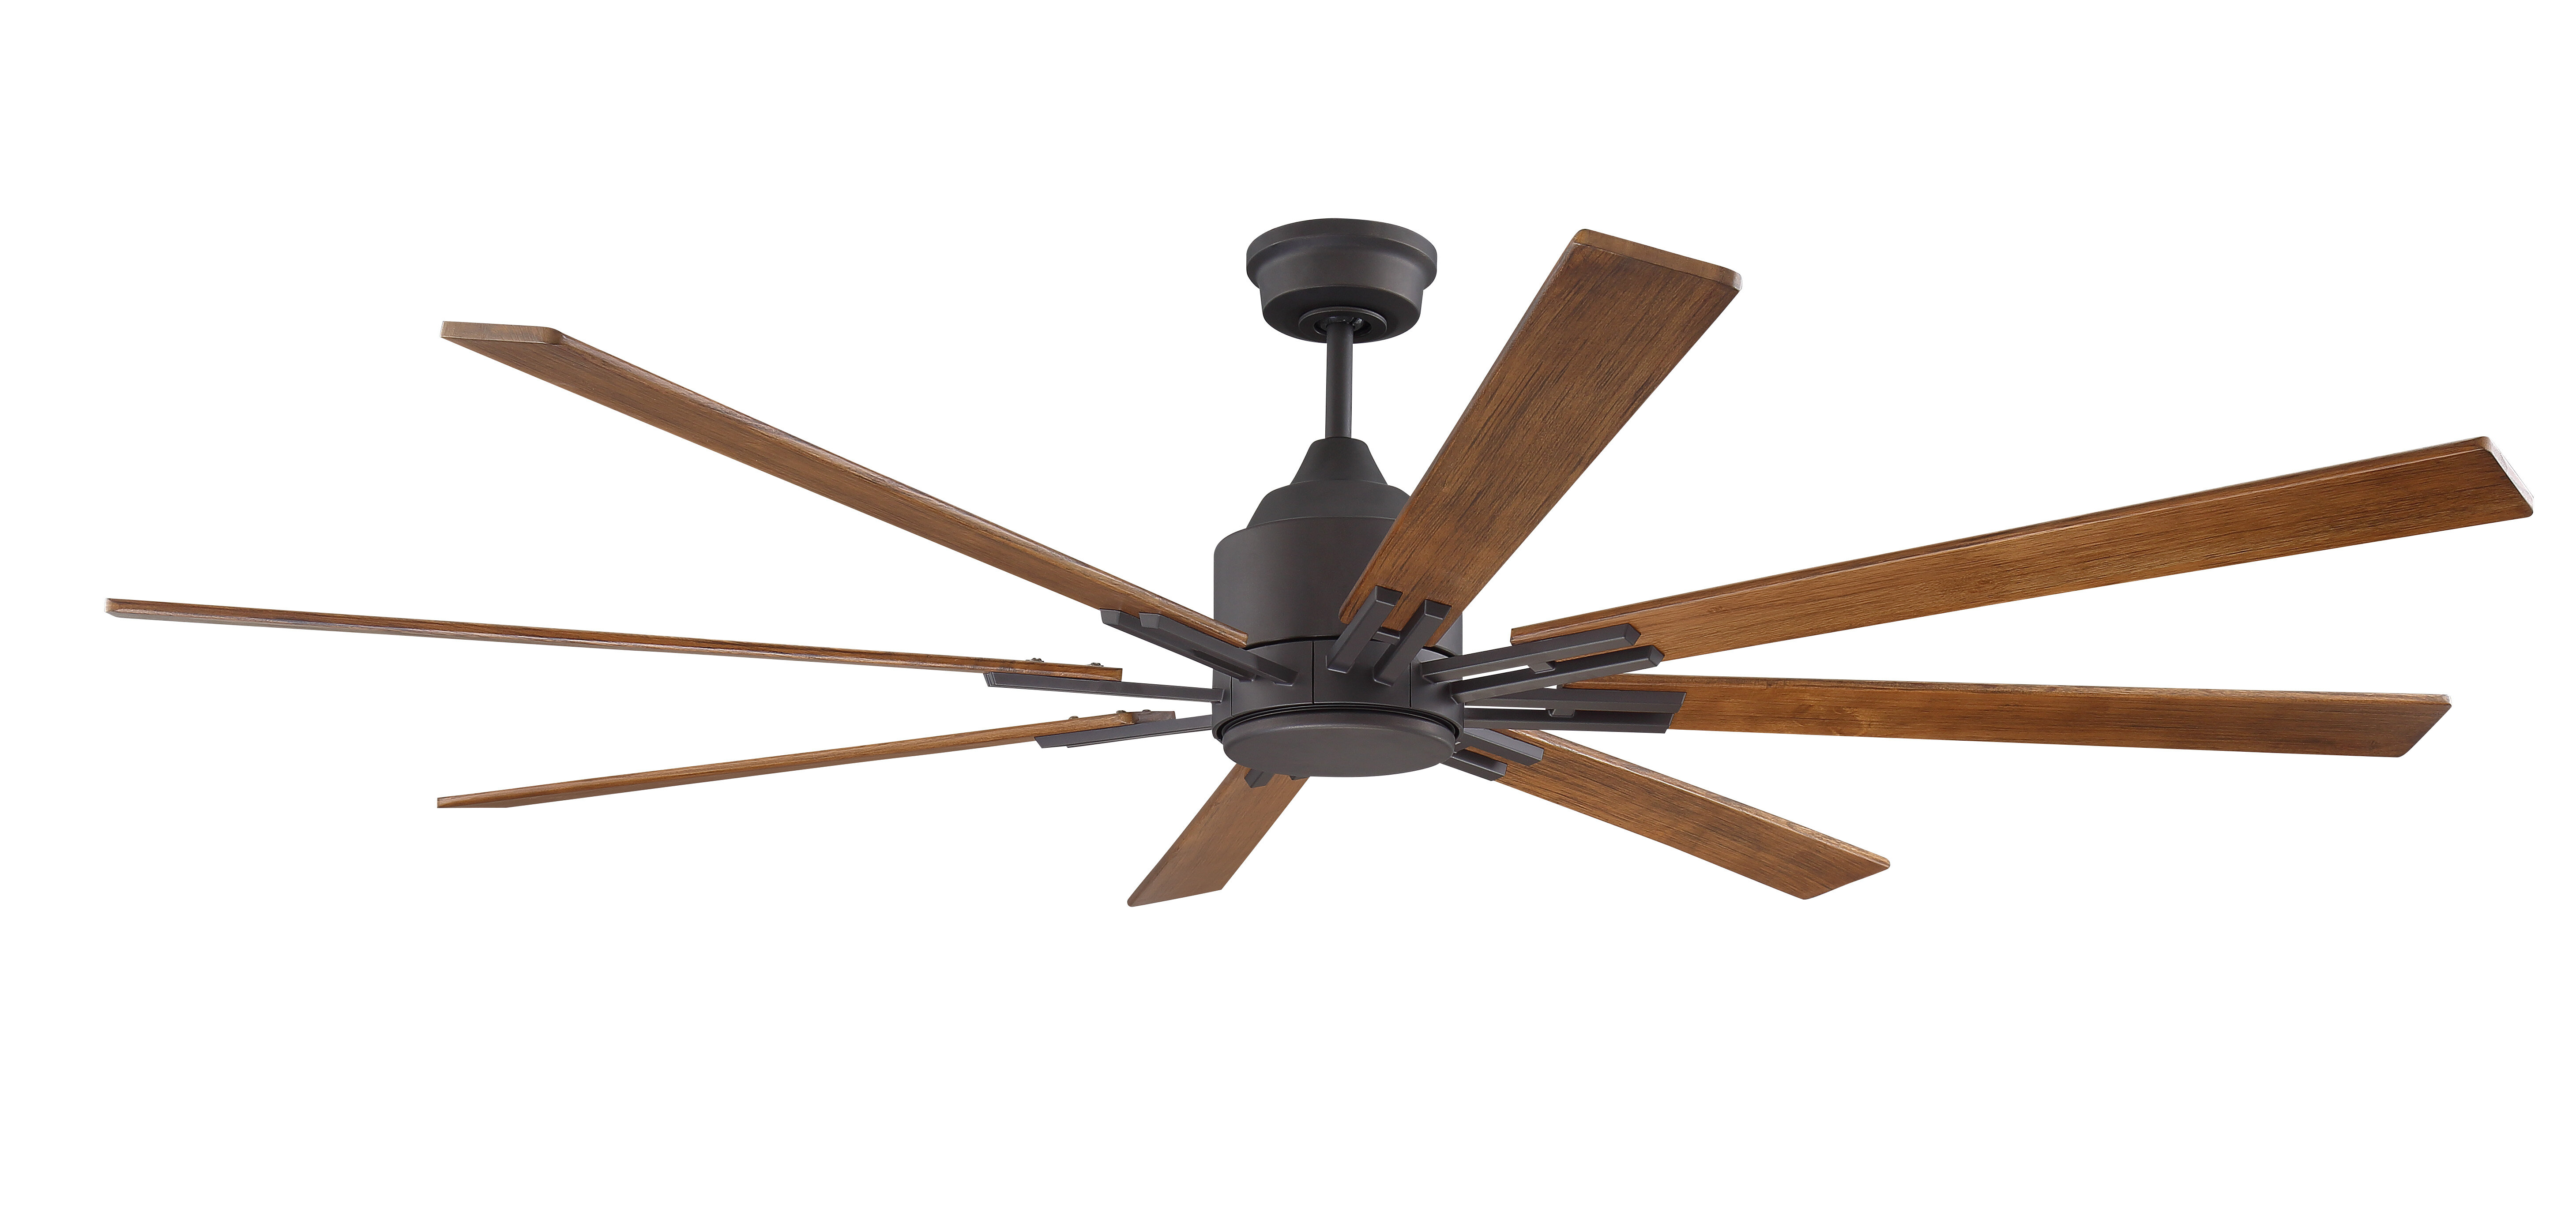 Foundry Select 70 Hysley 8 Blade Led Windmill Ceiling Fan With Remote Control And Light Kit Included Reviews Wayfair